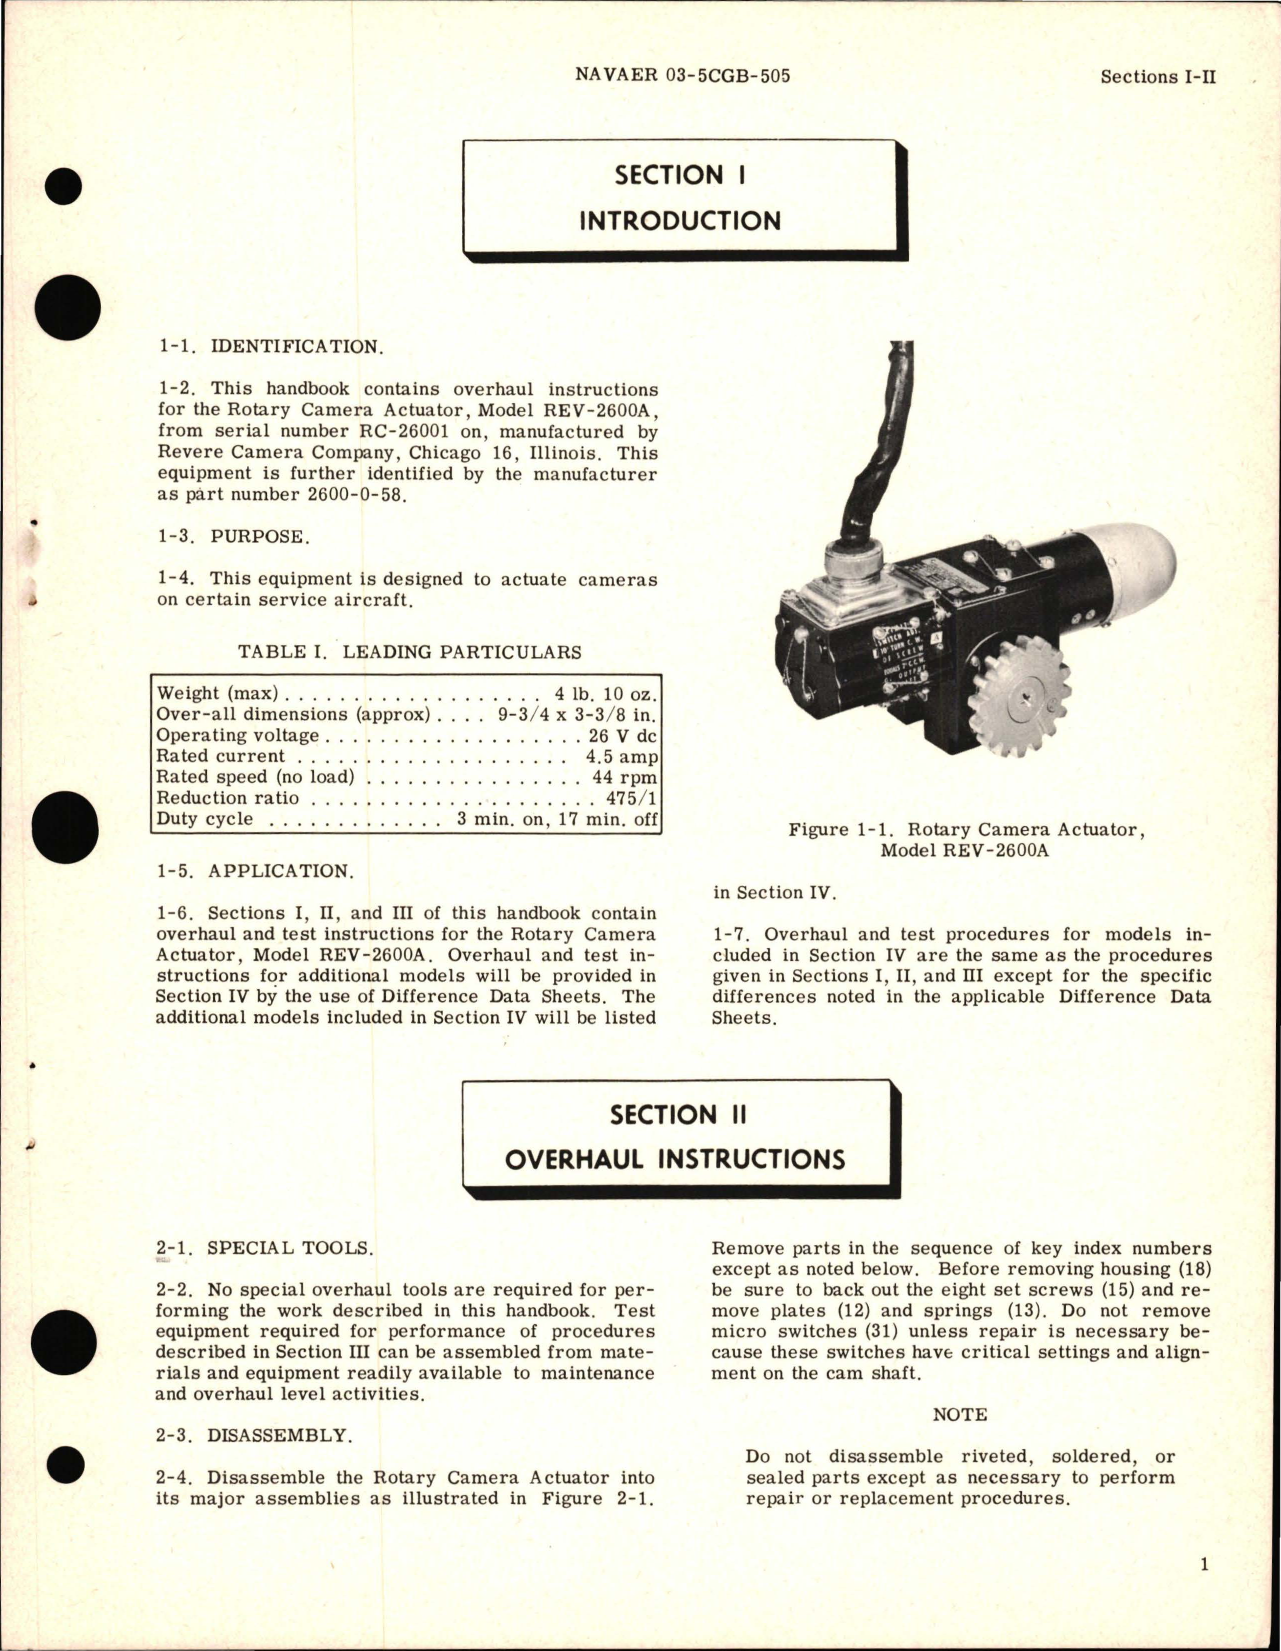 Sample page 5 from AirCorps Library document: Overhaul Instructions for Rotary Camera Actuator Model REV-2600A - Part 2600-0-58 